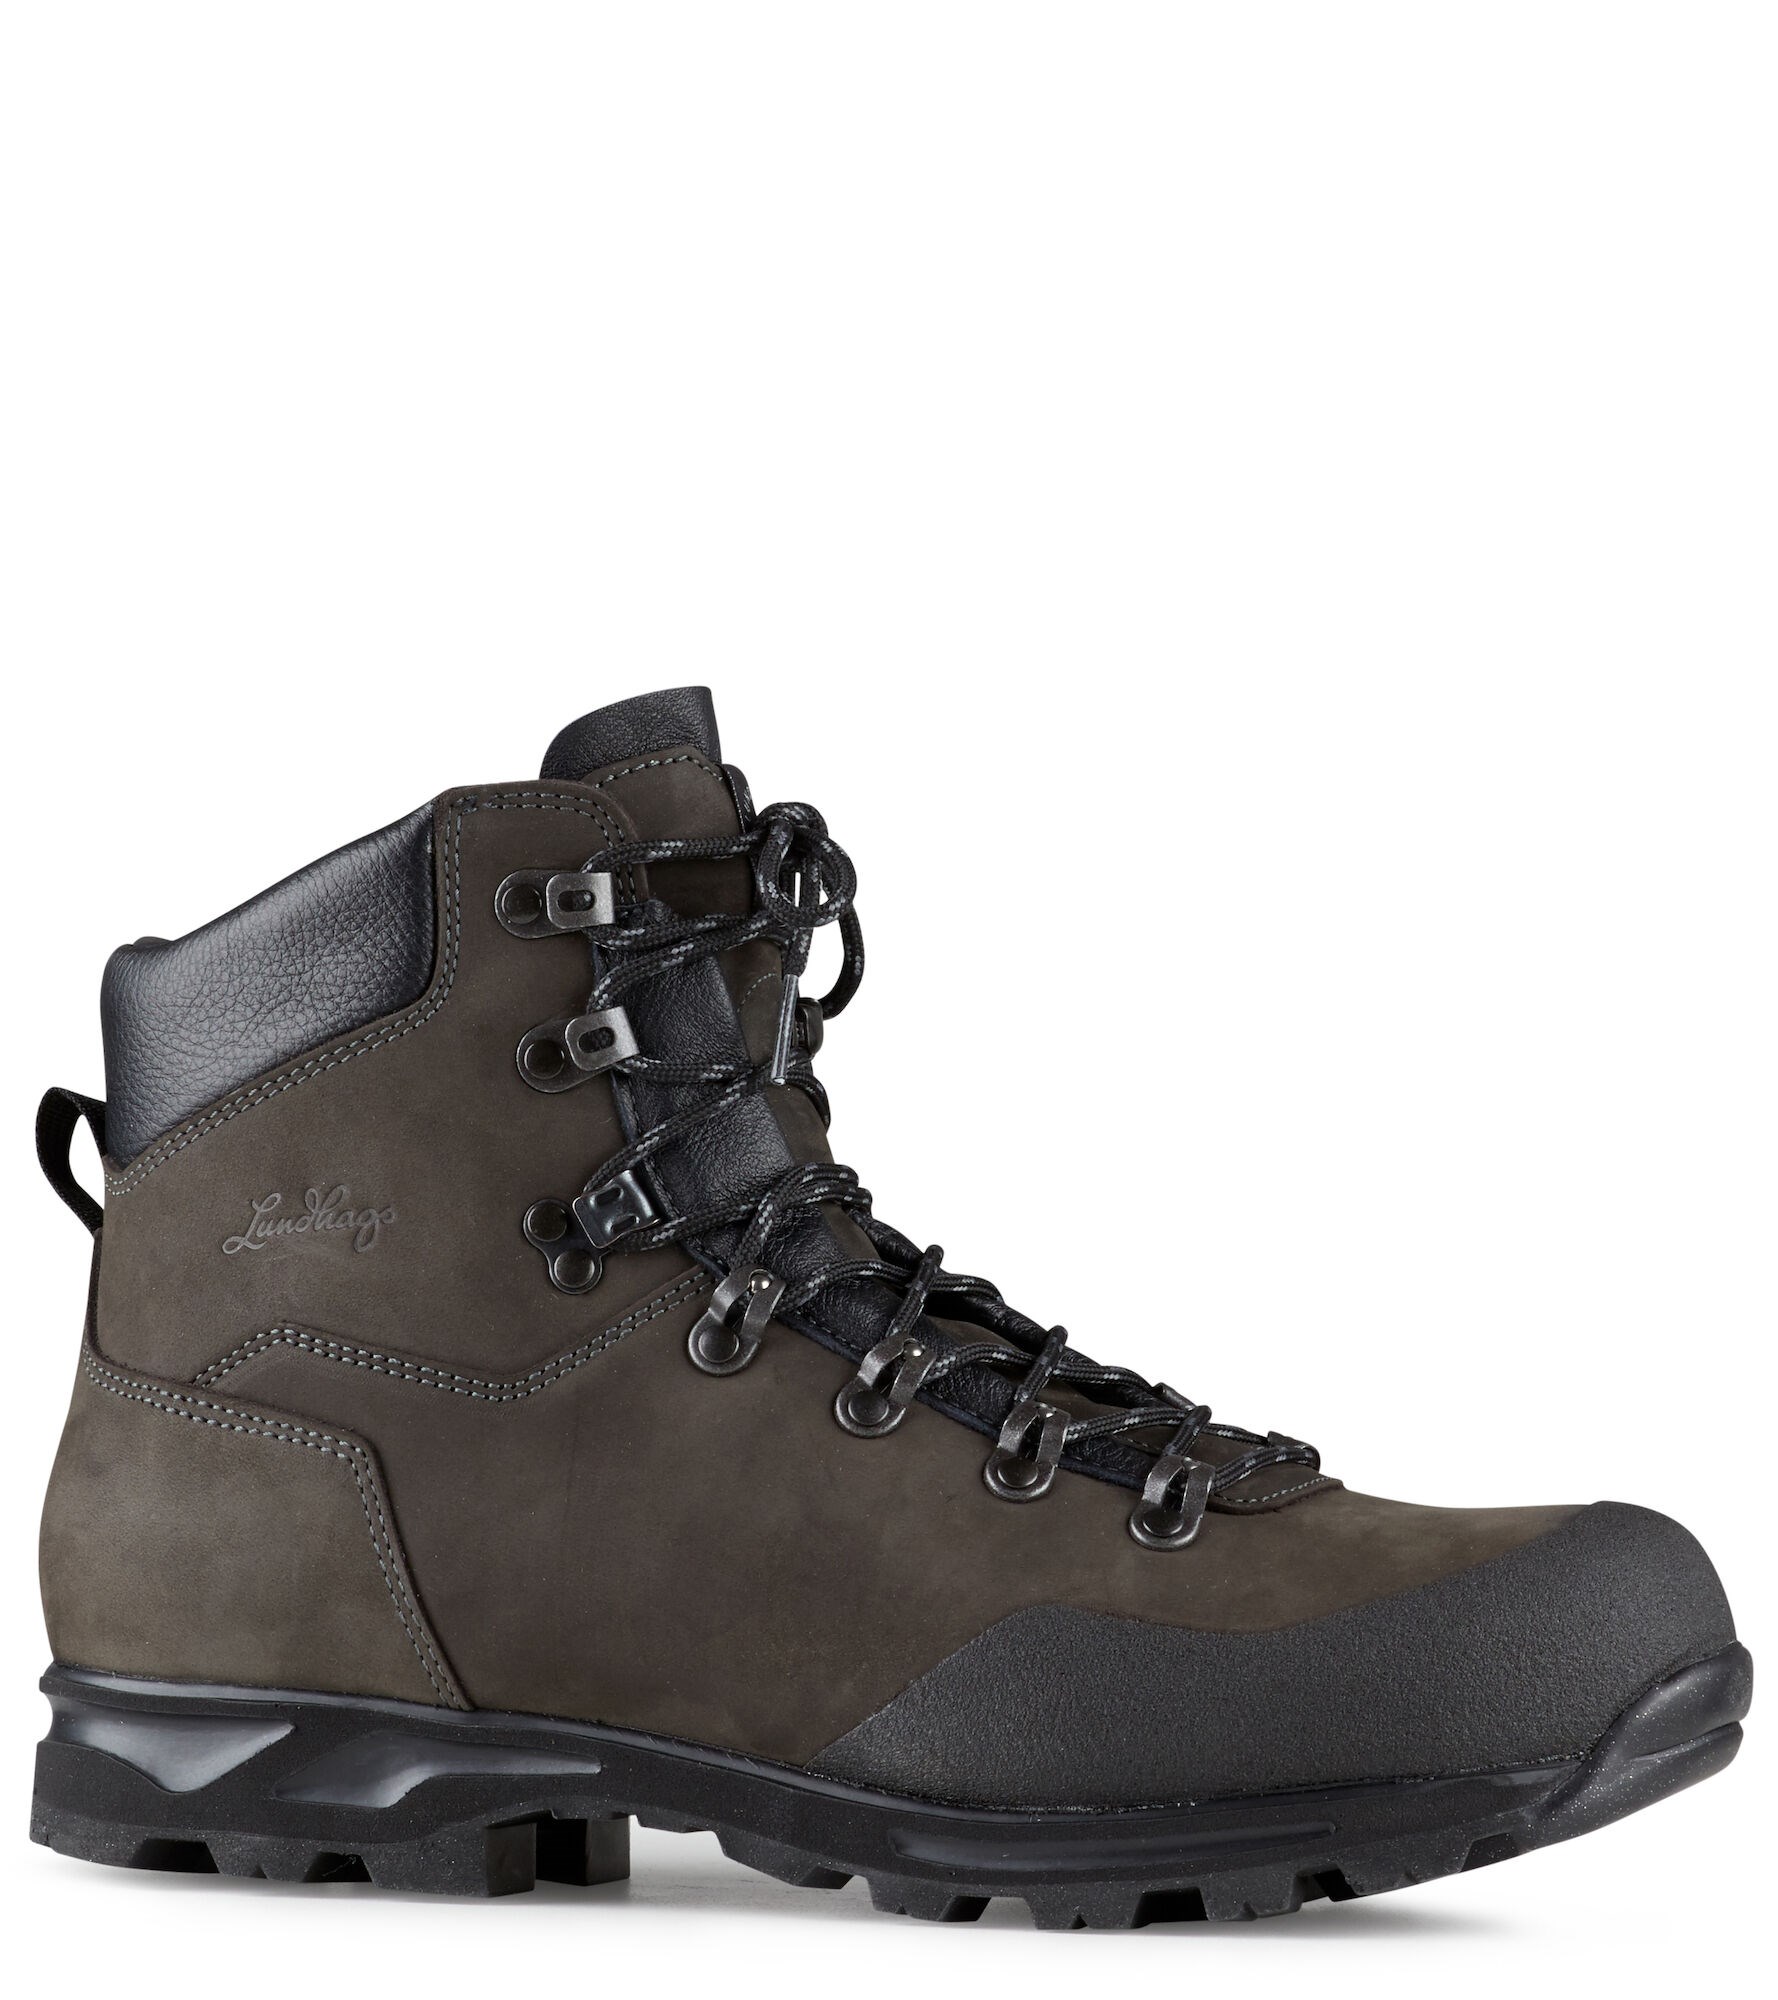 Stuore Insulated Mid Hiking Boots Unisex